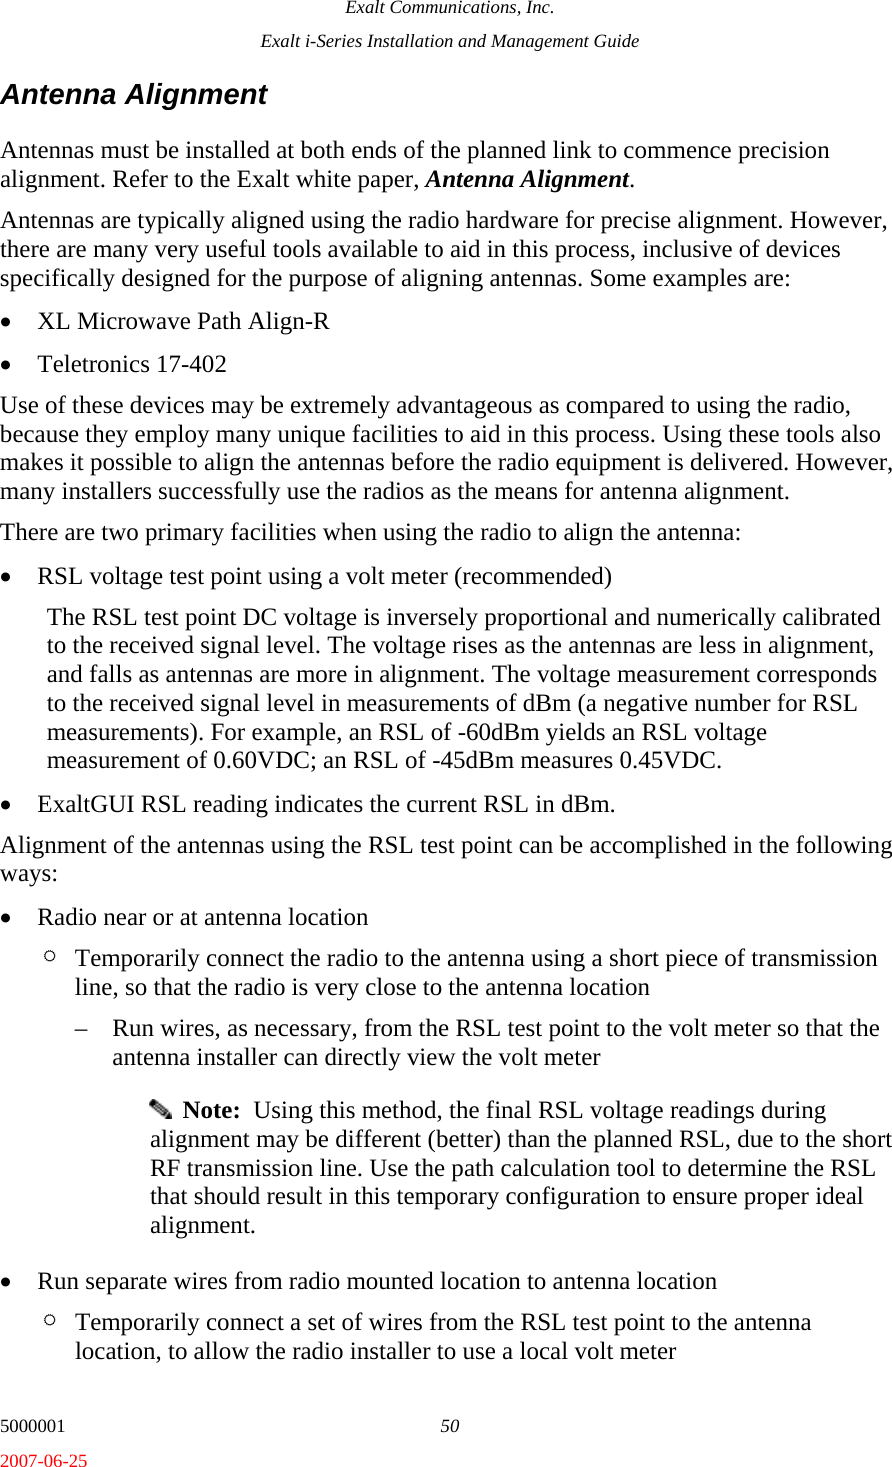 Exalt Communications, Inc. Exalt i-Series Installation and Management Guide 5000001  50 2007-06-25 Antenna Alignment Antennas must be installed at both ends of the planned link to commence precision alignment. Refer to the Exalt white paper, Antenna Alignment. Antennas are typically aligned using the radio hardware for precise alignment. However, there are many very useful tools available to aid in this process, inclusive of devices specifically designed for the purpose of aligning antennas. Some examples are: • XL Microwave Path Align-R • Teletronics 17-402 Use of these devices may be extremely advantageous as compared to using the radio, because they employ many unique facilities to aid in this process. Using these tools also makes it possible to align the antennas before the radio equipment is delivered. However, many installers successfully use the radios as the means for antenna alignment. There are two primary facilities when using the radio to align the antenna: • RSL voltage test point using a volt meter (recommended) The RSL test point DC voltage is inversely proportional and numerically calibrated to the received signal level. The voltage rises as the antennas are less in alignment, and falls as antennas are more in alignment. The voltage measurement corresponds to the received signal level in measurements of dBm (a negative number for RSL measurements). For example, an RSL of -60dBm yields an RSL voltage measurement of 0.60VDC; an RSL of -45dBm measures 0.45VDC. • ExaltGUI RSL reading indicates the current RSL in dBm. Alignment of the antennas using the RSL test point can be accomplished in the following ways: • Radio near or at antenna location ¶ Temporarily connect the radio to the antenna using a short piece of transmission line, so that the radio is very close to the antenna location – Run wires, as necessary, from the RSL test point to the volt meter so that the antenna installer can directly view the volt meter   Note:  Using this method, the final RSL voltage readings during alignment may be different (better) than the planned RSL, due to the short RF transmission line. Use the path calculation tool to determine the RSL that should result in this temporary configuration to ensure proper ideal alignment. • Run separate wires from radio mounted location to antenna location ¶ Temporarily connect a set of wires from the RSL test point to the antenna location, to allow the radio installer to use a local volt meter 